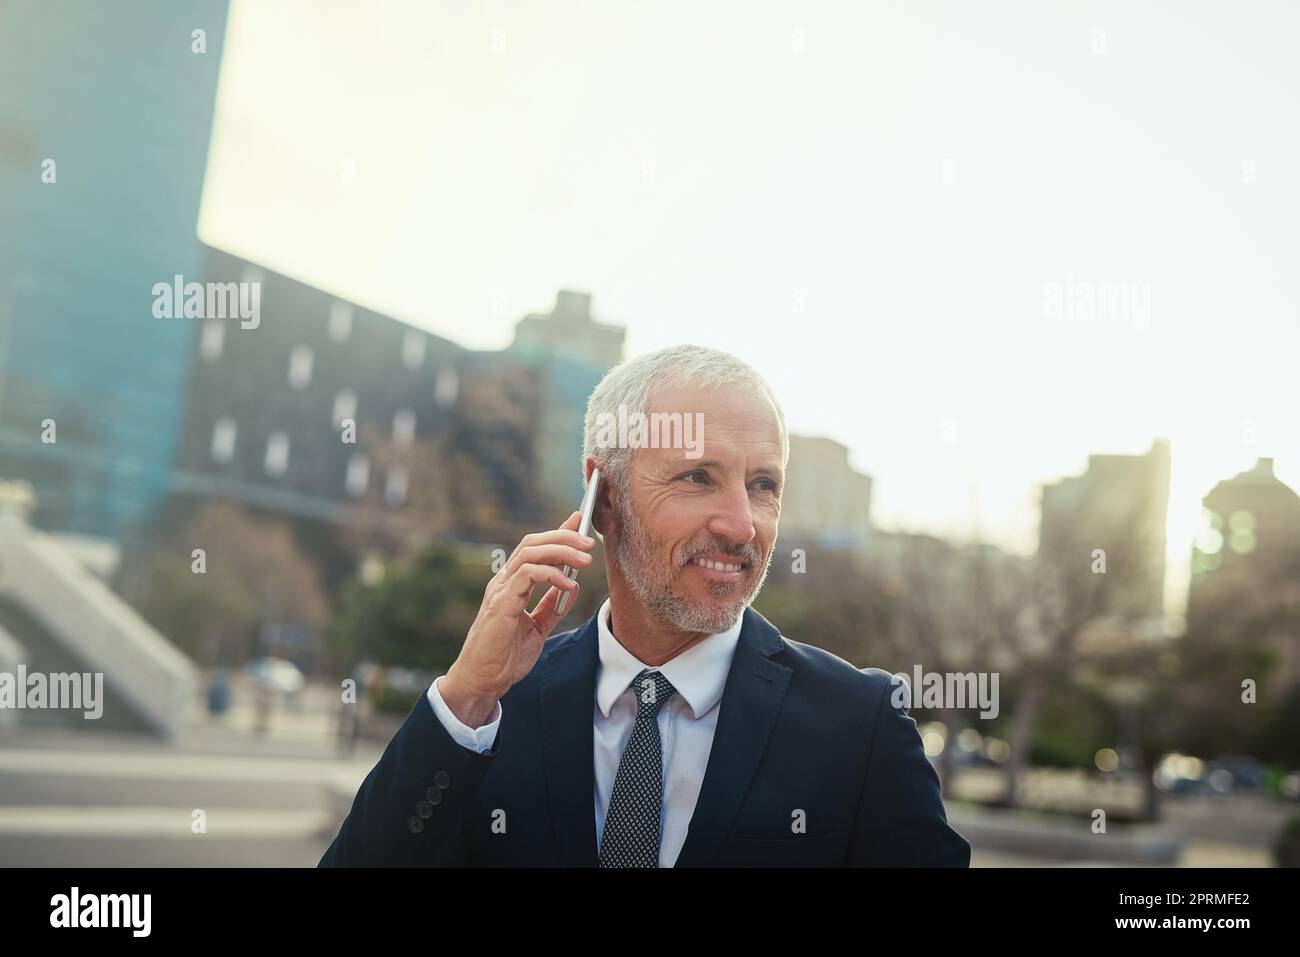 Anytime, anywhere. a businessman answering his phone while walking to his office in the city. Stock Photo